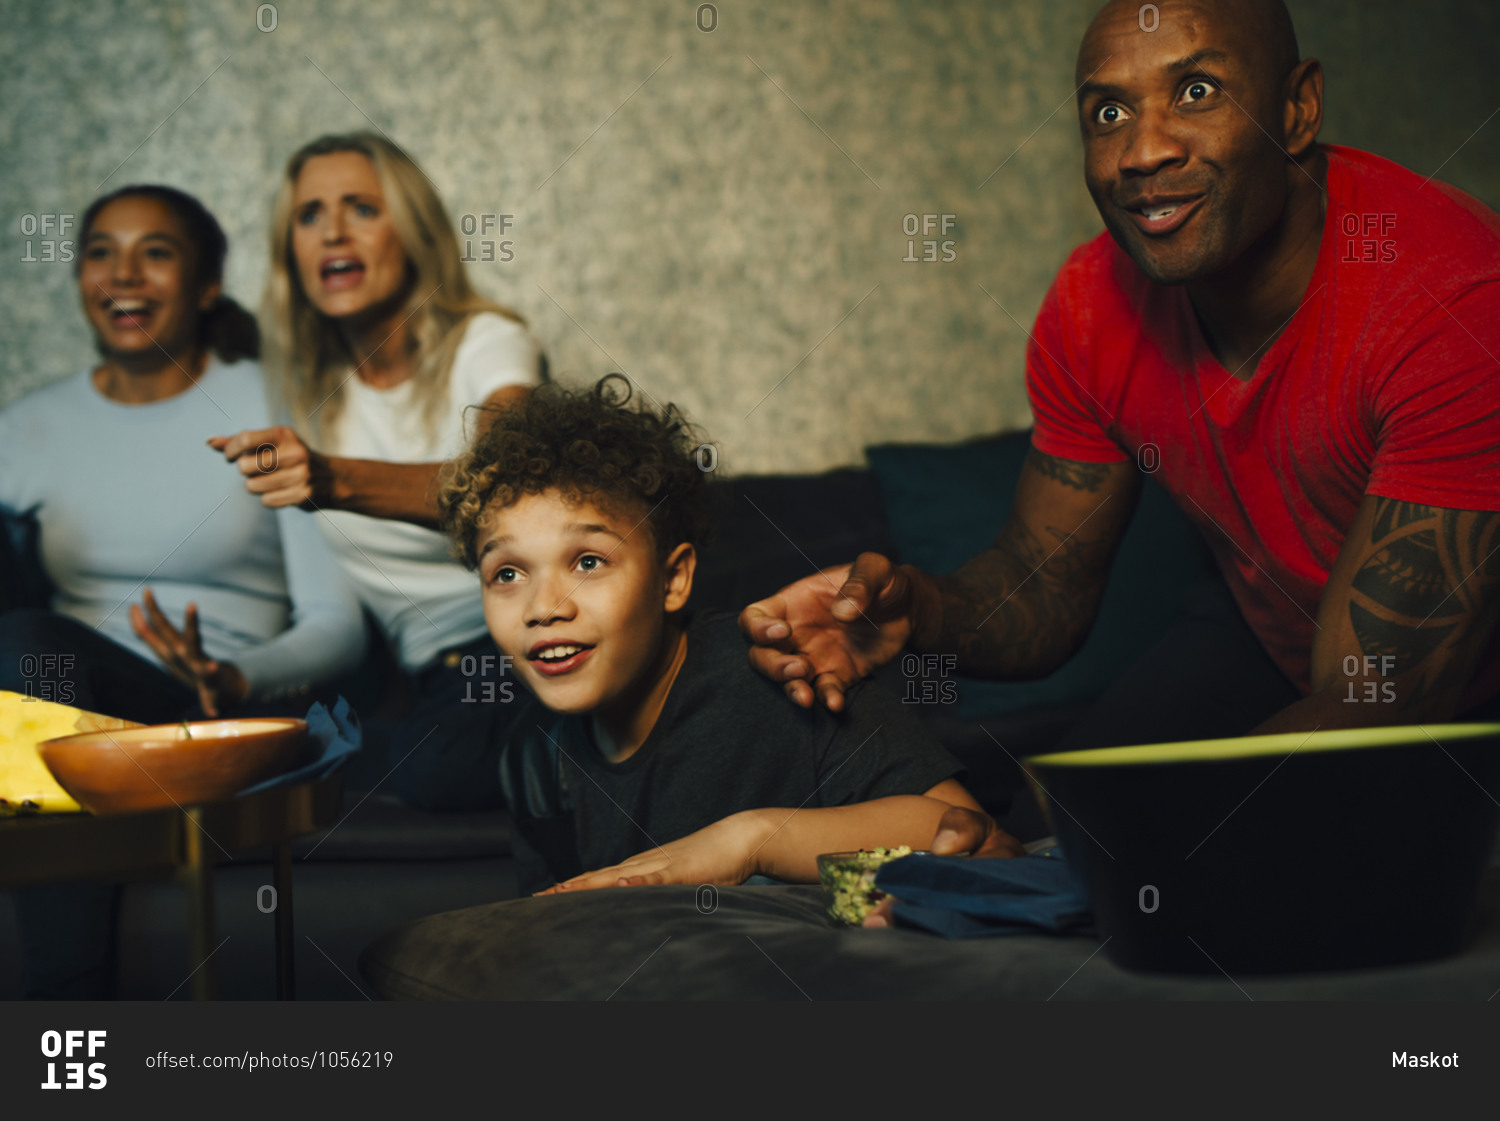 Excited sports fans watching TV together at night